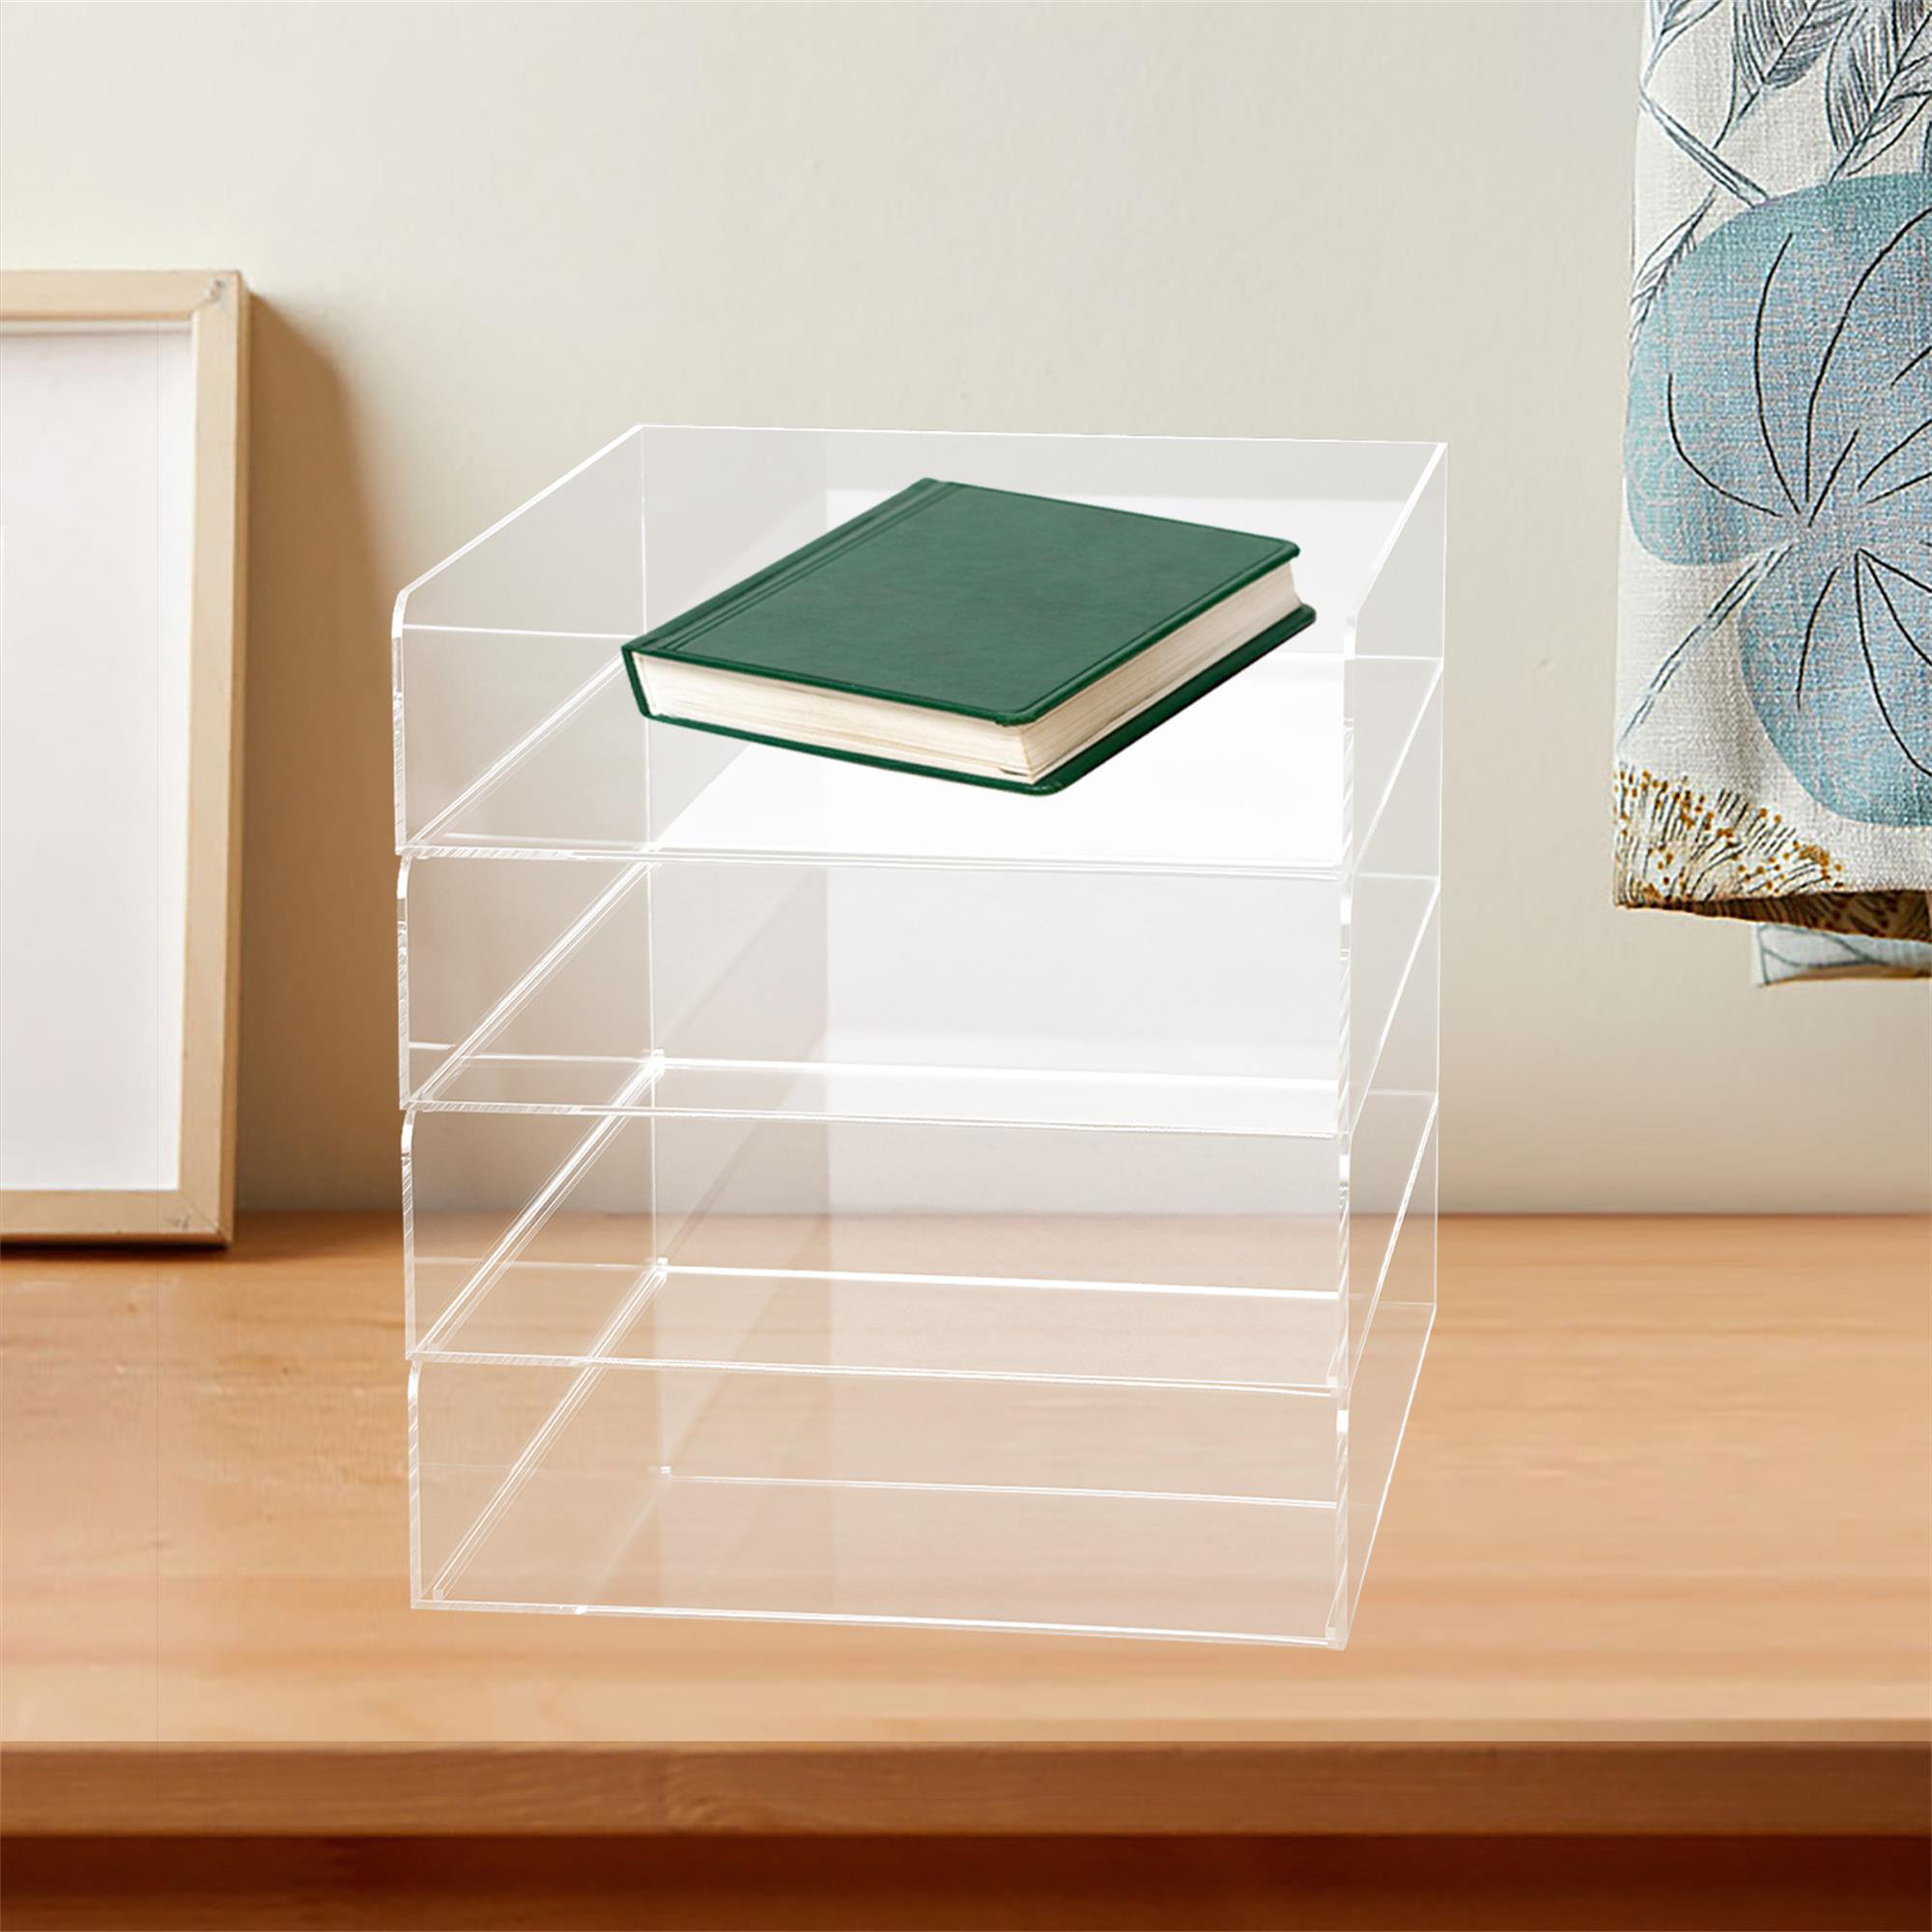 Set of 2 Clear Acrylic Stackable Document Paper Tray Desktop Organizer Rack